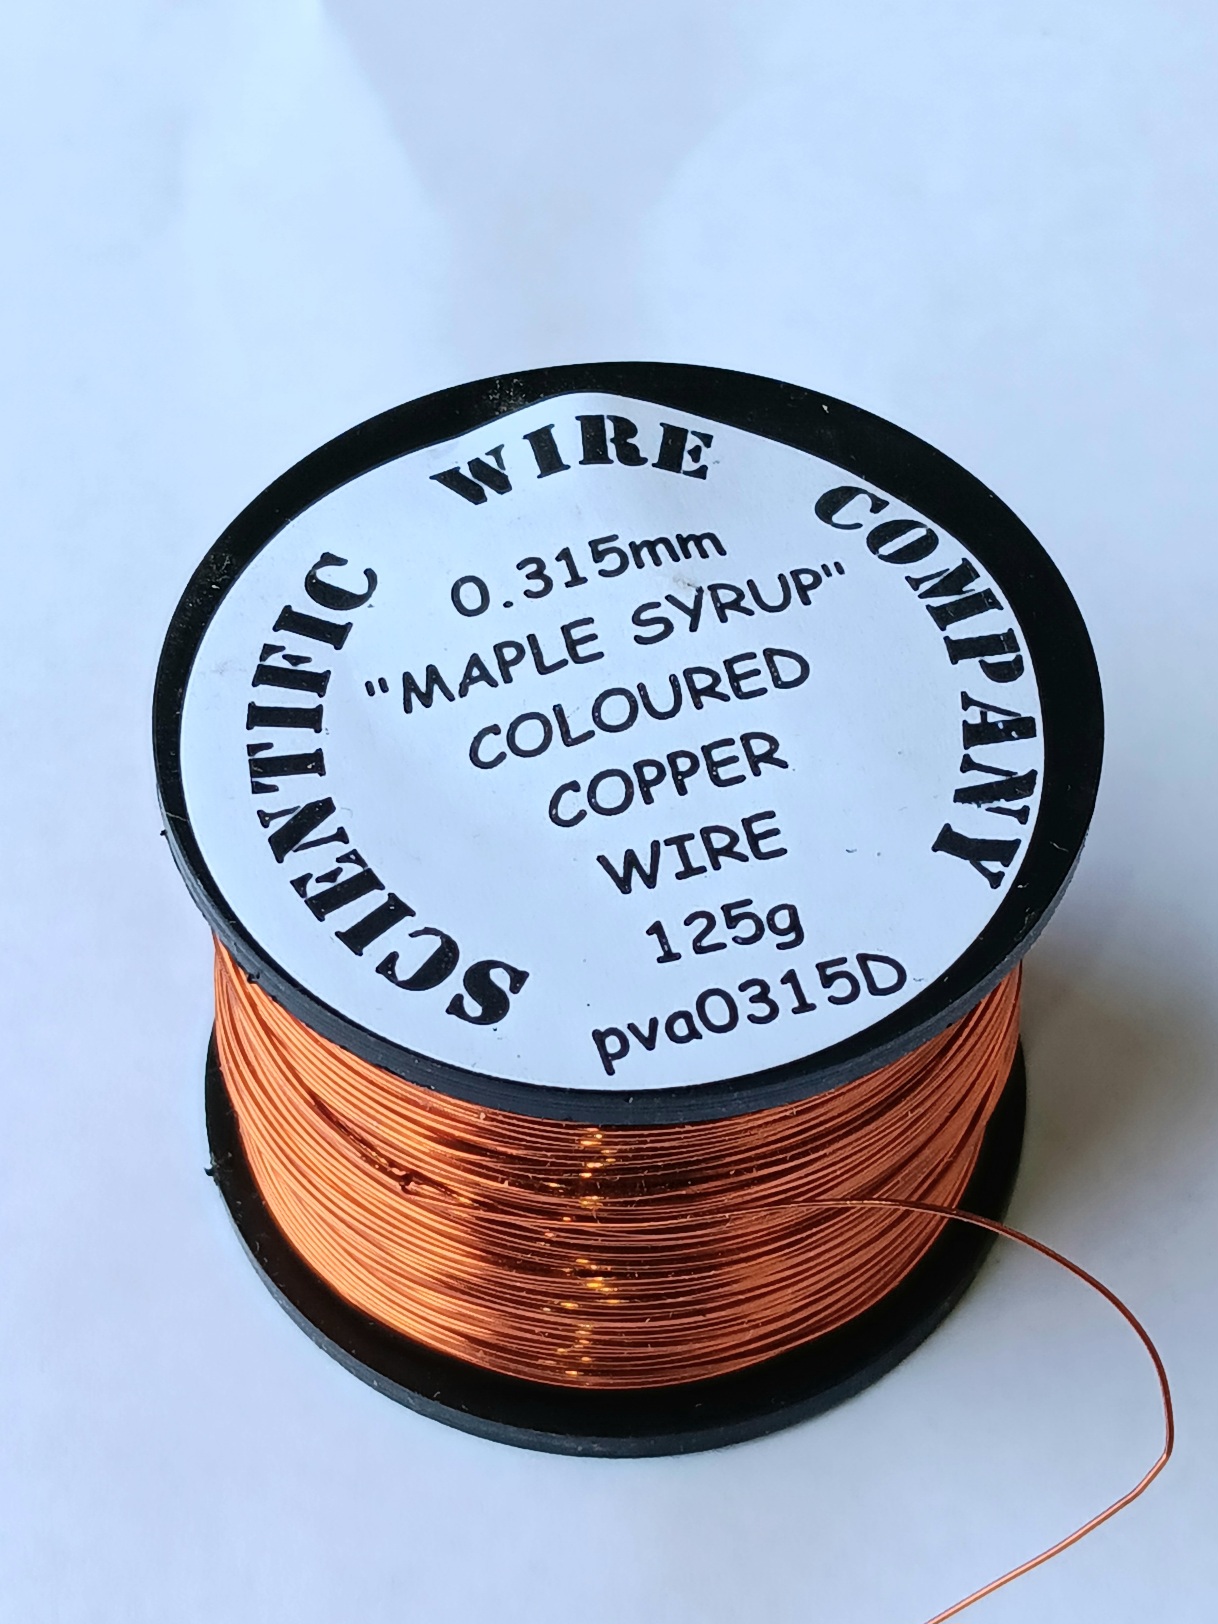 100g 0.315mm MAPLE SYRUP Coloured Enamelled Copper Wire